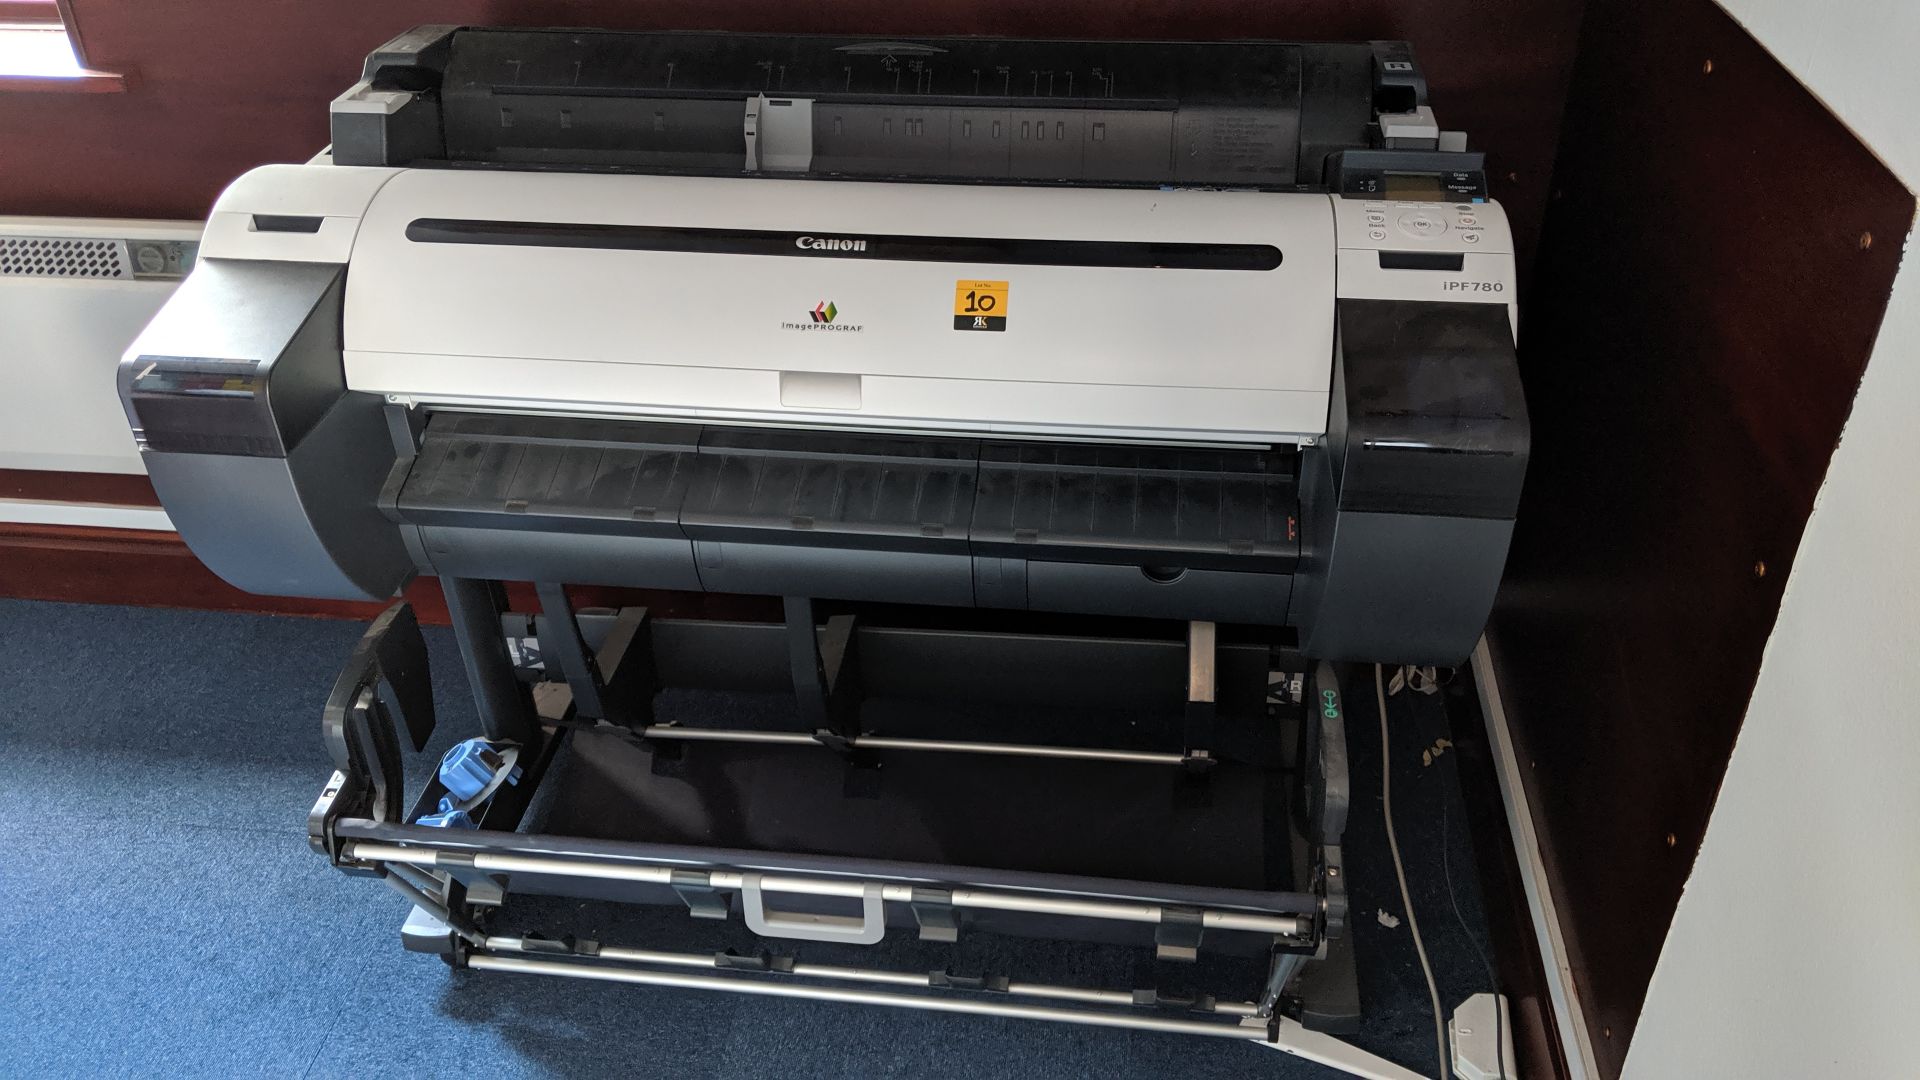 Canon iPF780 wide format printer IMPORTANT: Please remember goods successfully bid upon must be paid